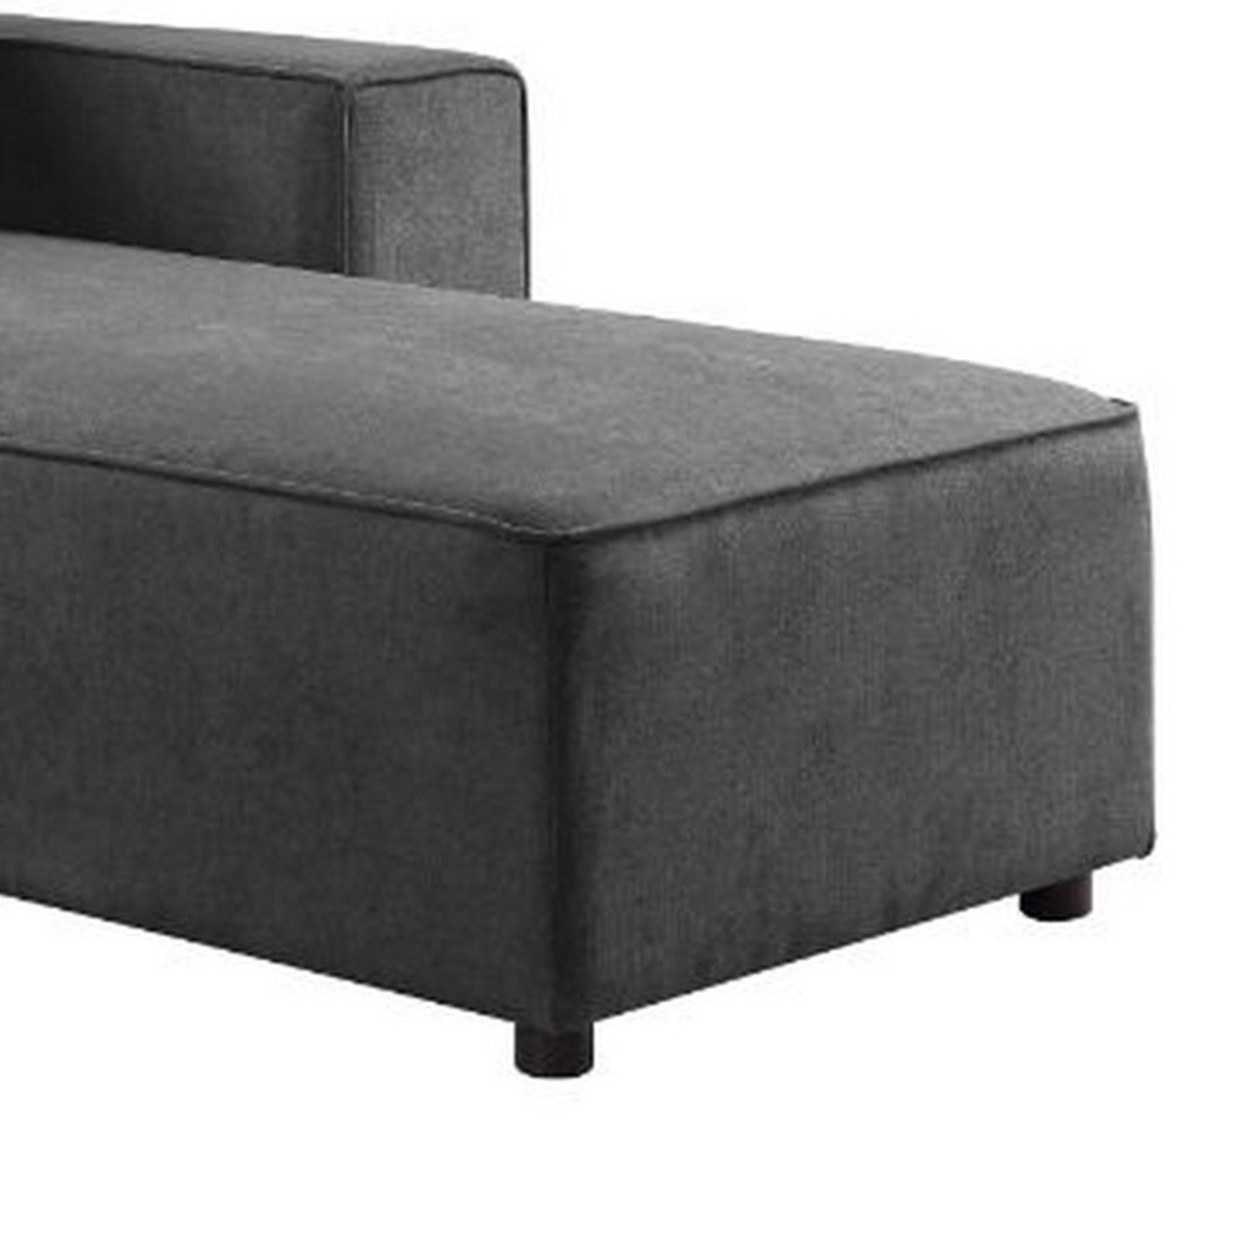 Modular Chaise With Piped Stitch And Loose Pillow Back, Gray- Saltoro Sherpi